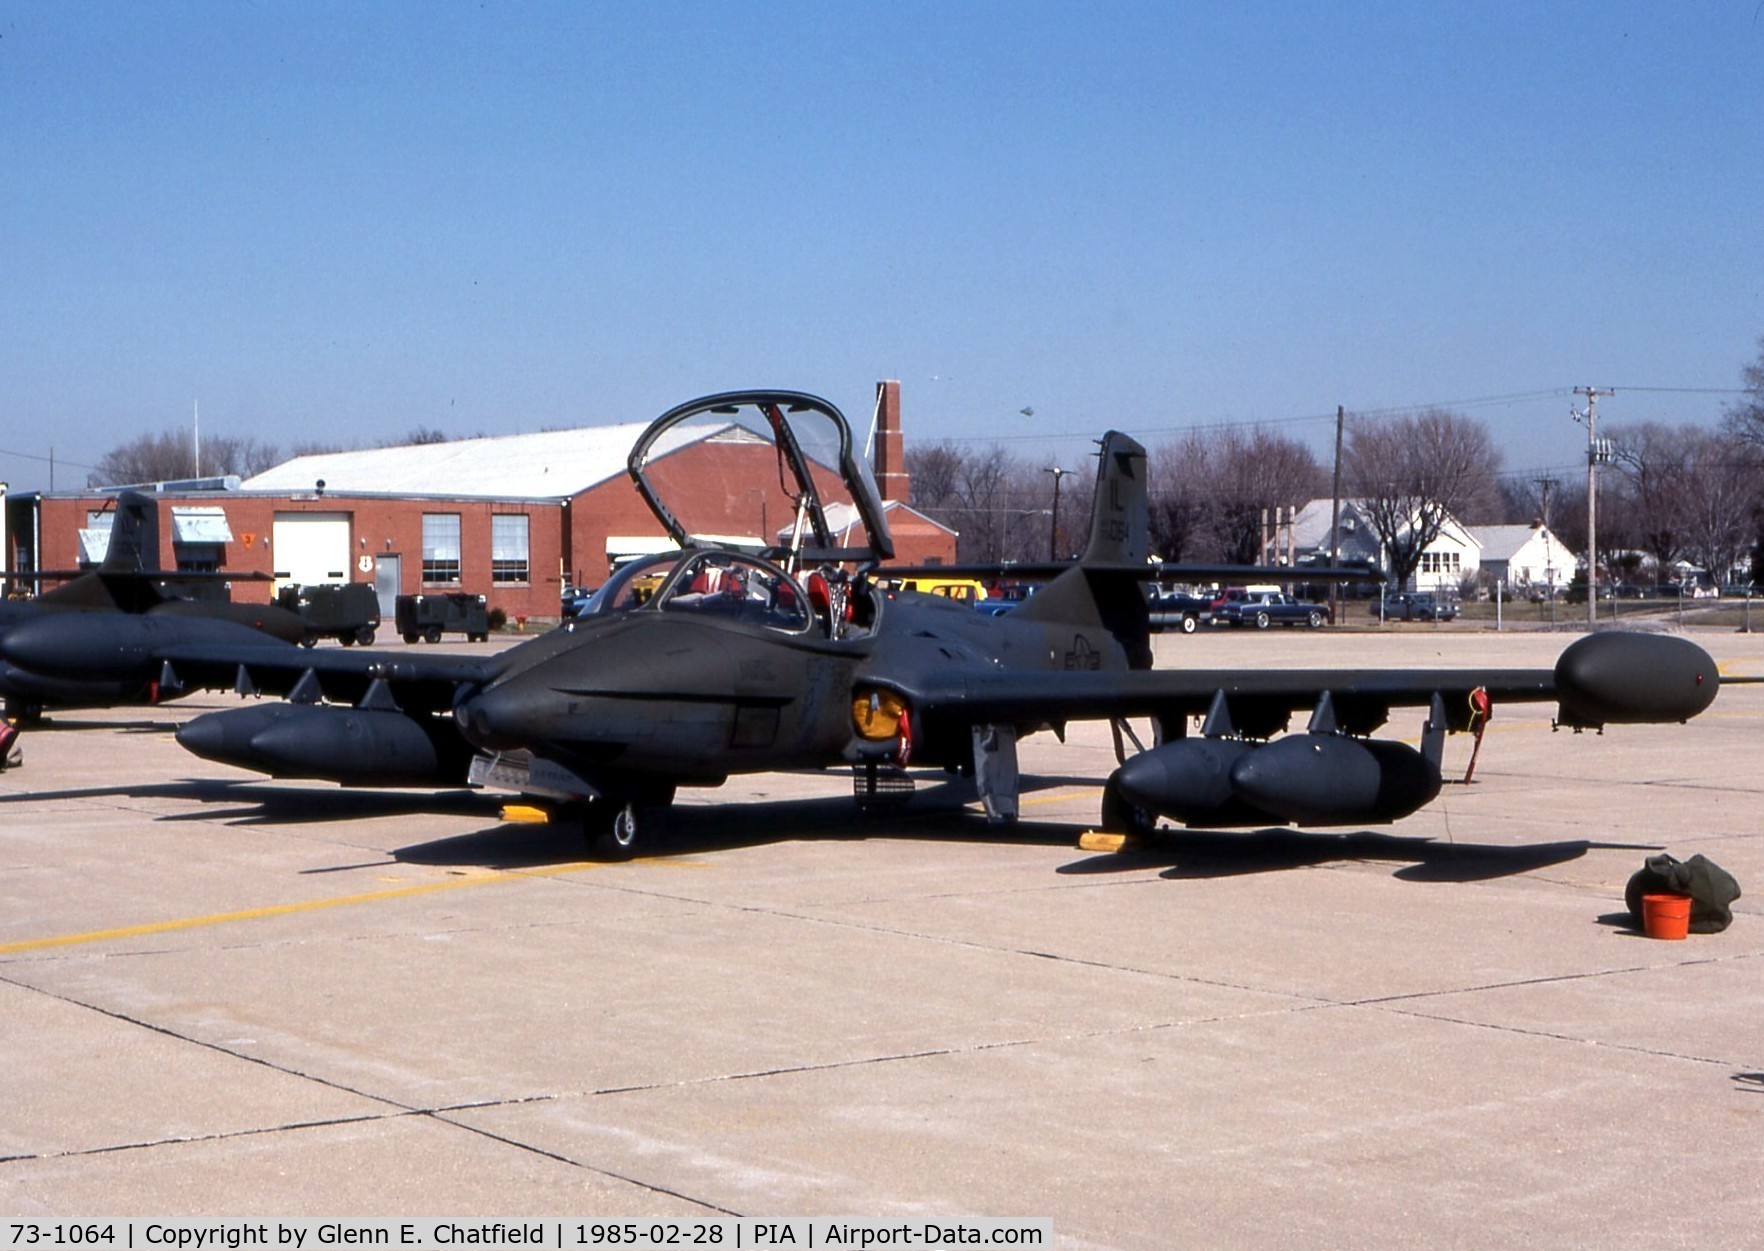 73-1064, 1973 Cessna OA-37B Dragonfly C/N 43427, OA-37B with the Illinois ANG